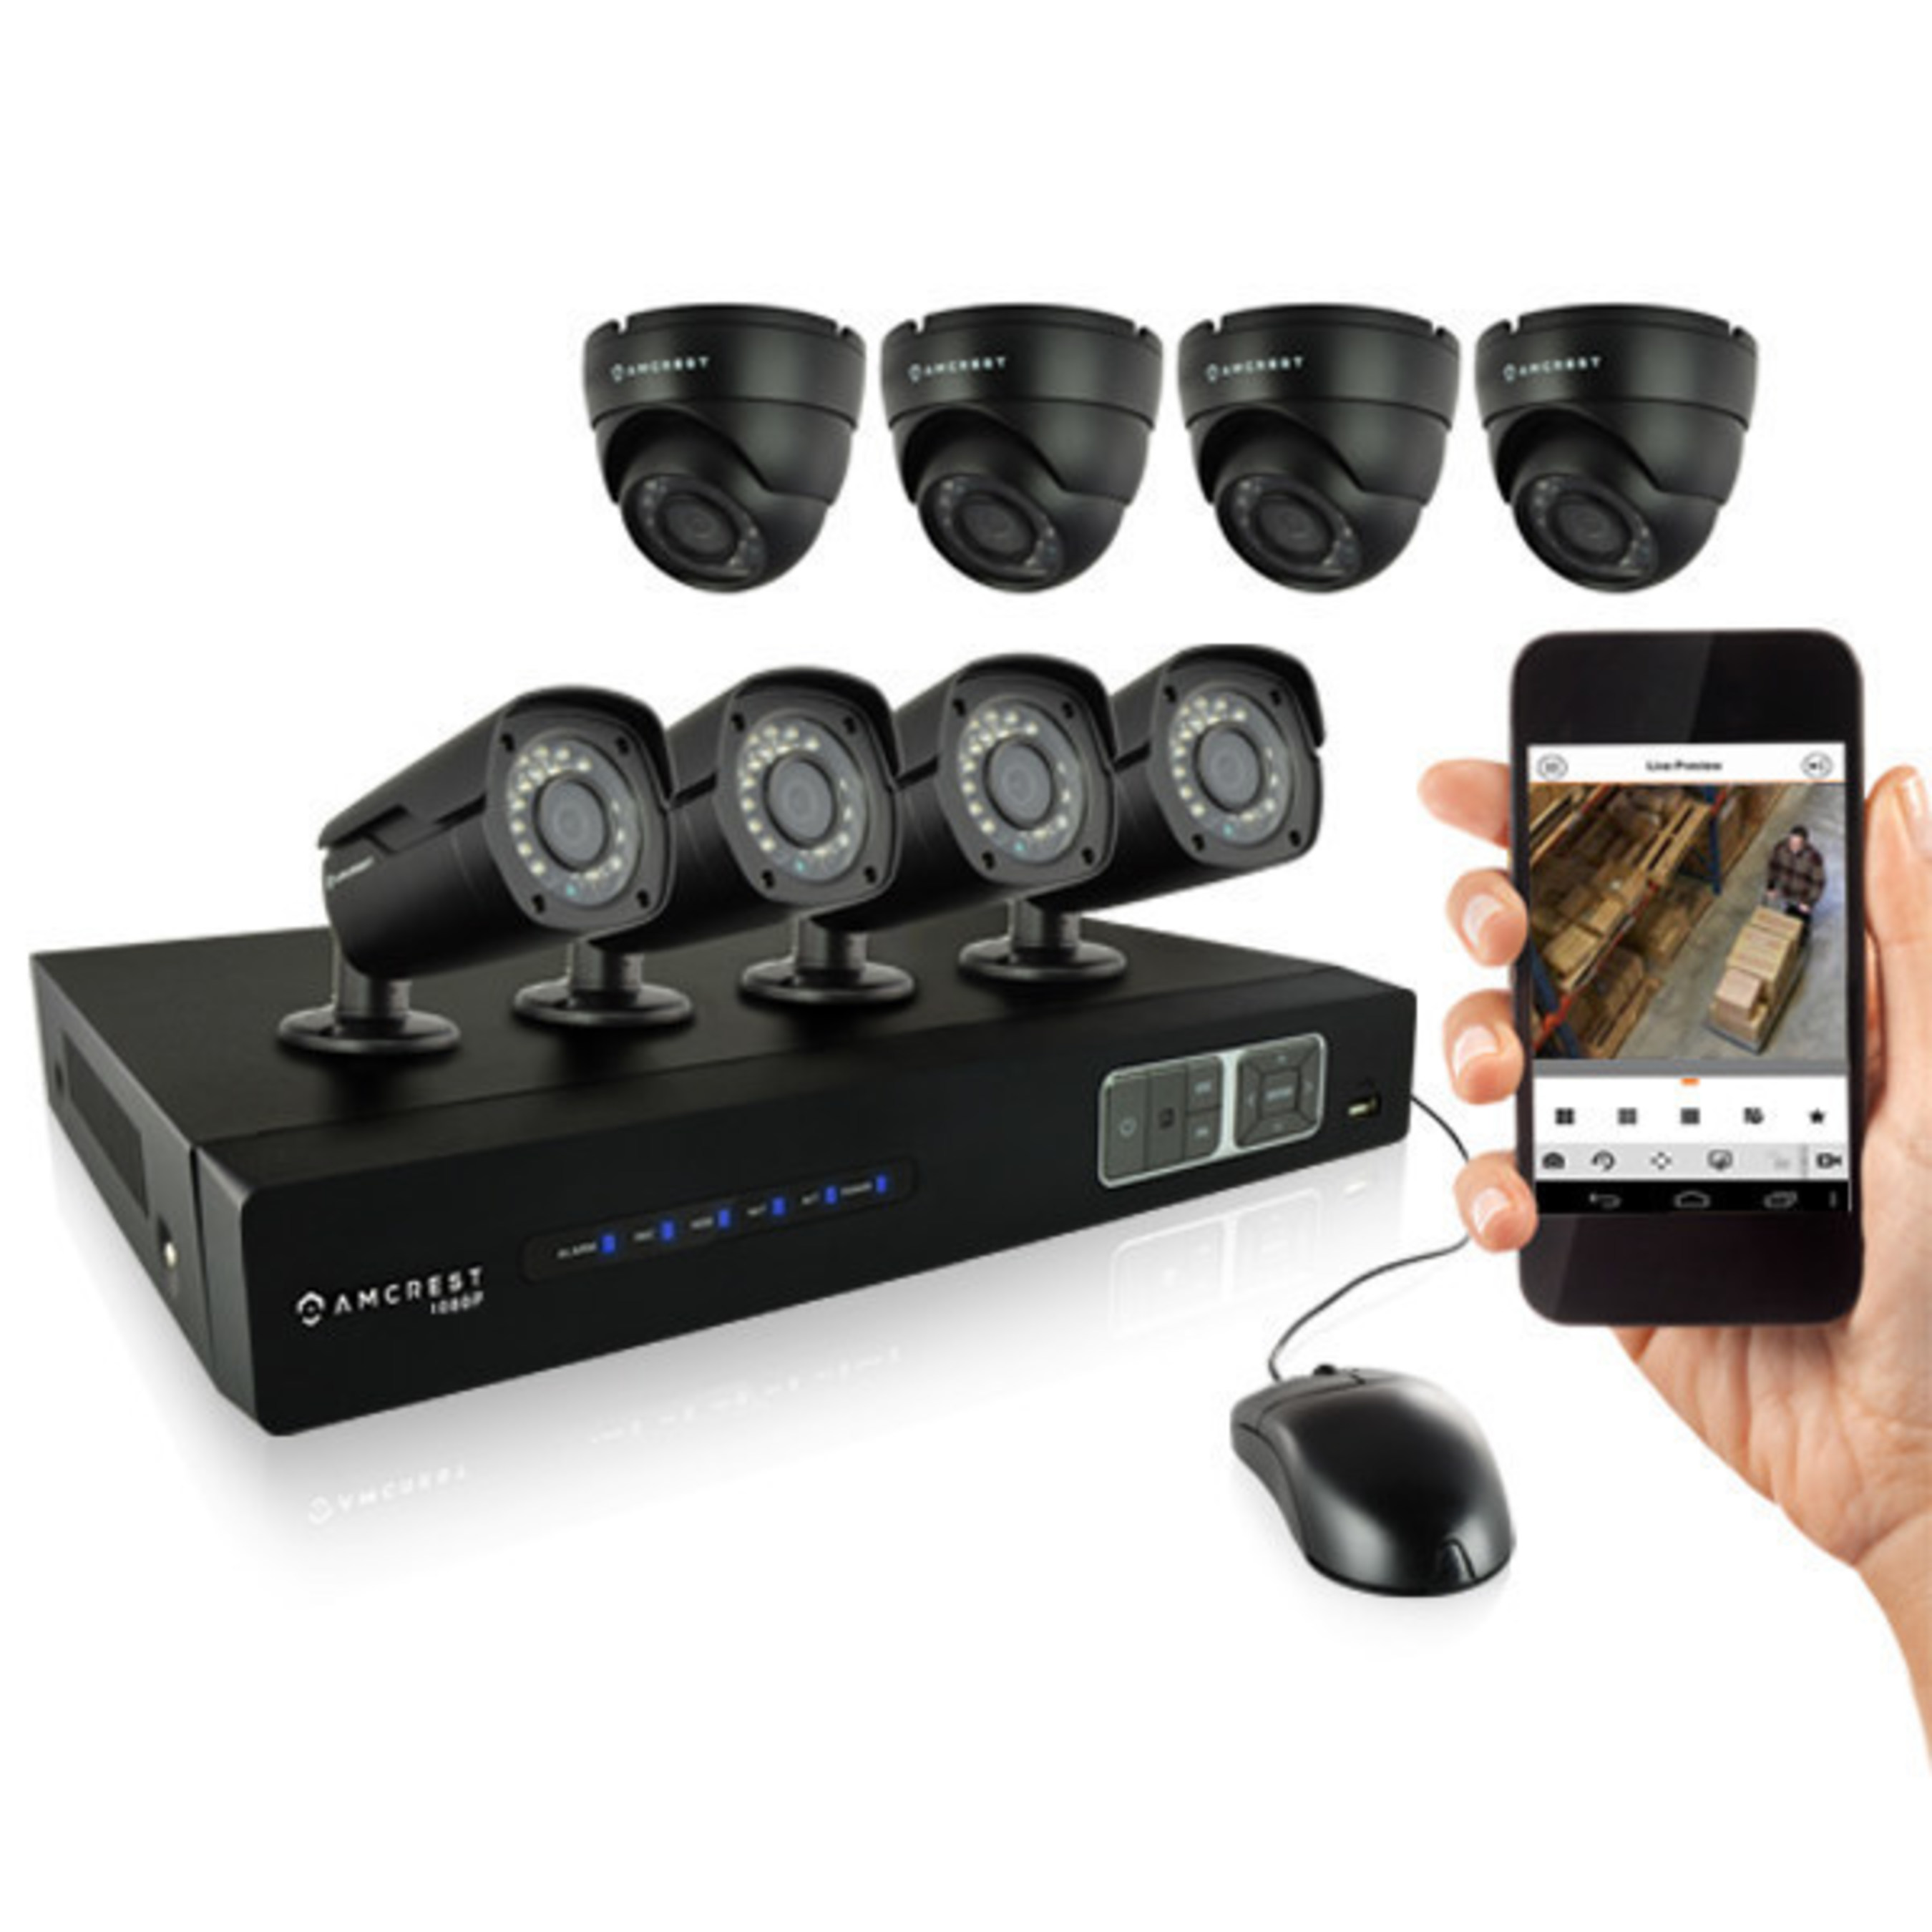 AMCREST.COM OFFERS 1080P WITH NEW HDCVI TECHNOLOGY, 4TB DVR SECURITY CAMERA SYSTEM w/ 4x2.1MP BULLET CAMERAS & 4X2.1MP DOME CAMERAS. EASY QR CODE SET UP/VGA & HDMI OUTPUT/WEB & SMARTPHONE REMOTE VIEWING. MORE SECURE THAN IP. SAME DAY SHIPPING, 30-DAY MONEY BACK RETURN POLICY AND WARRANTY REPLACEMENT PROCESS ALL BASED OUT OF THE US. ONLINE SUPPORT TOOLS AND TECHNICAL TEAM AVAILABLE.AMCREST - SIMPLE, RELIABLE, SECURE.